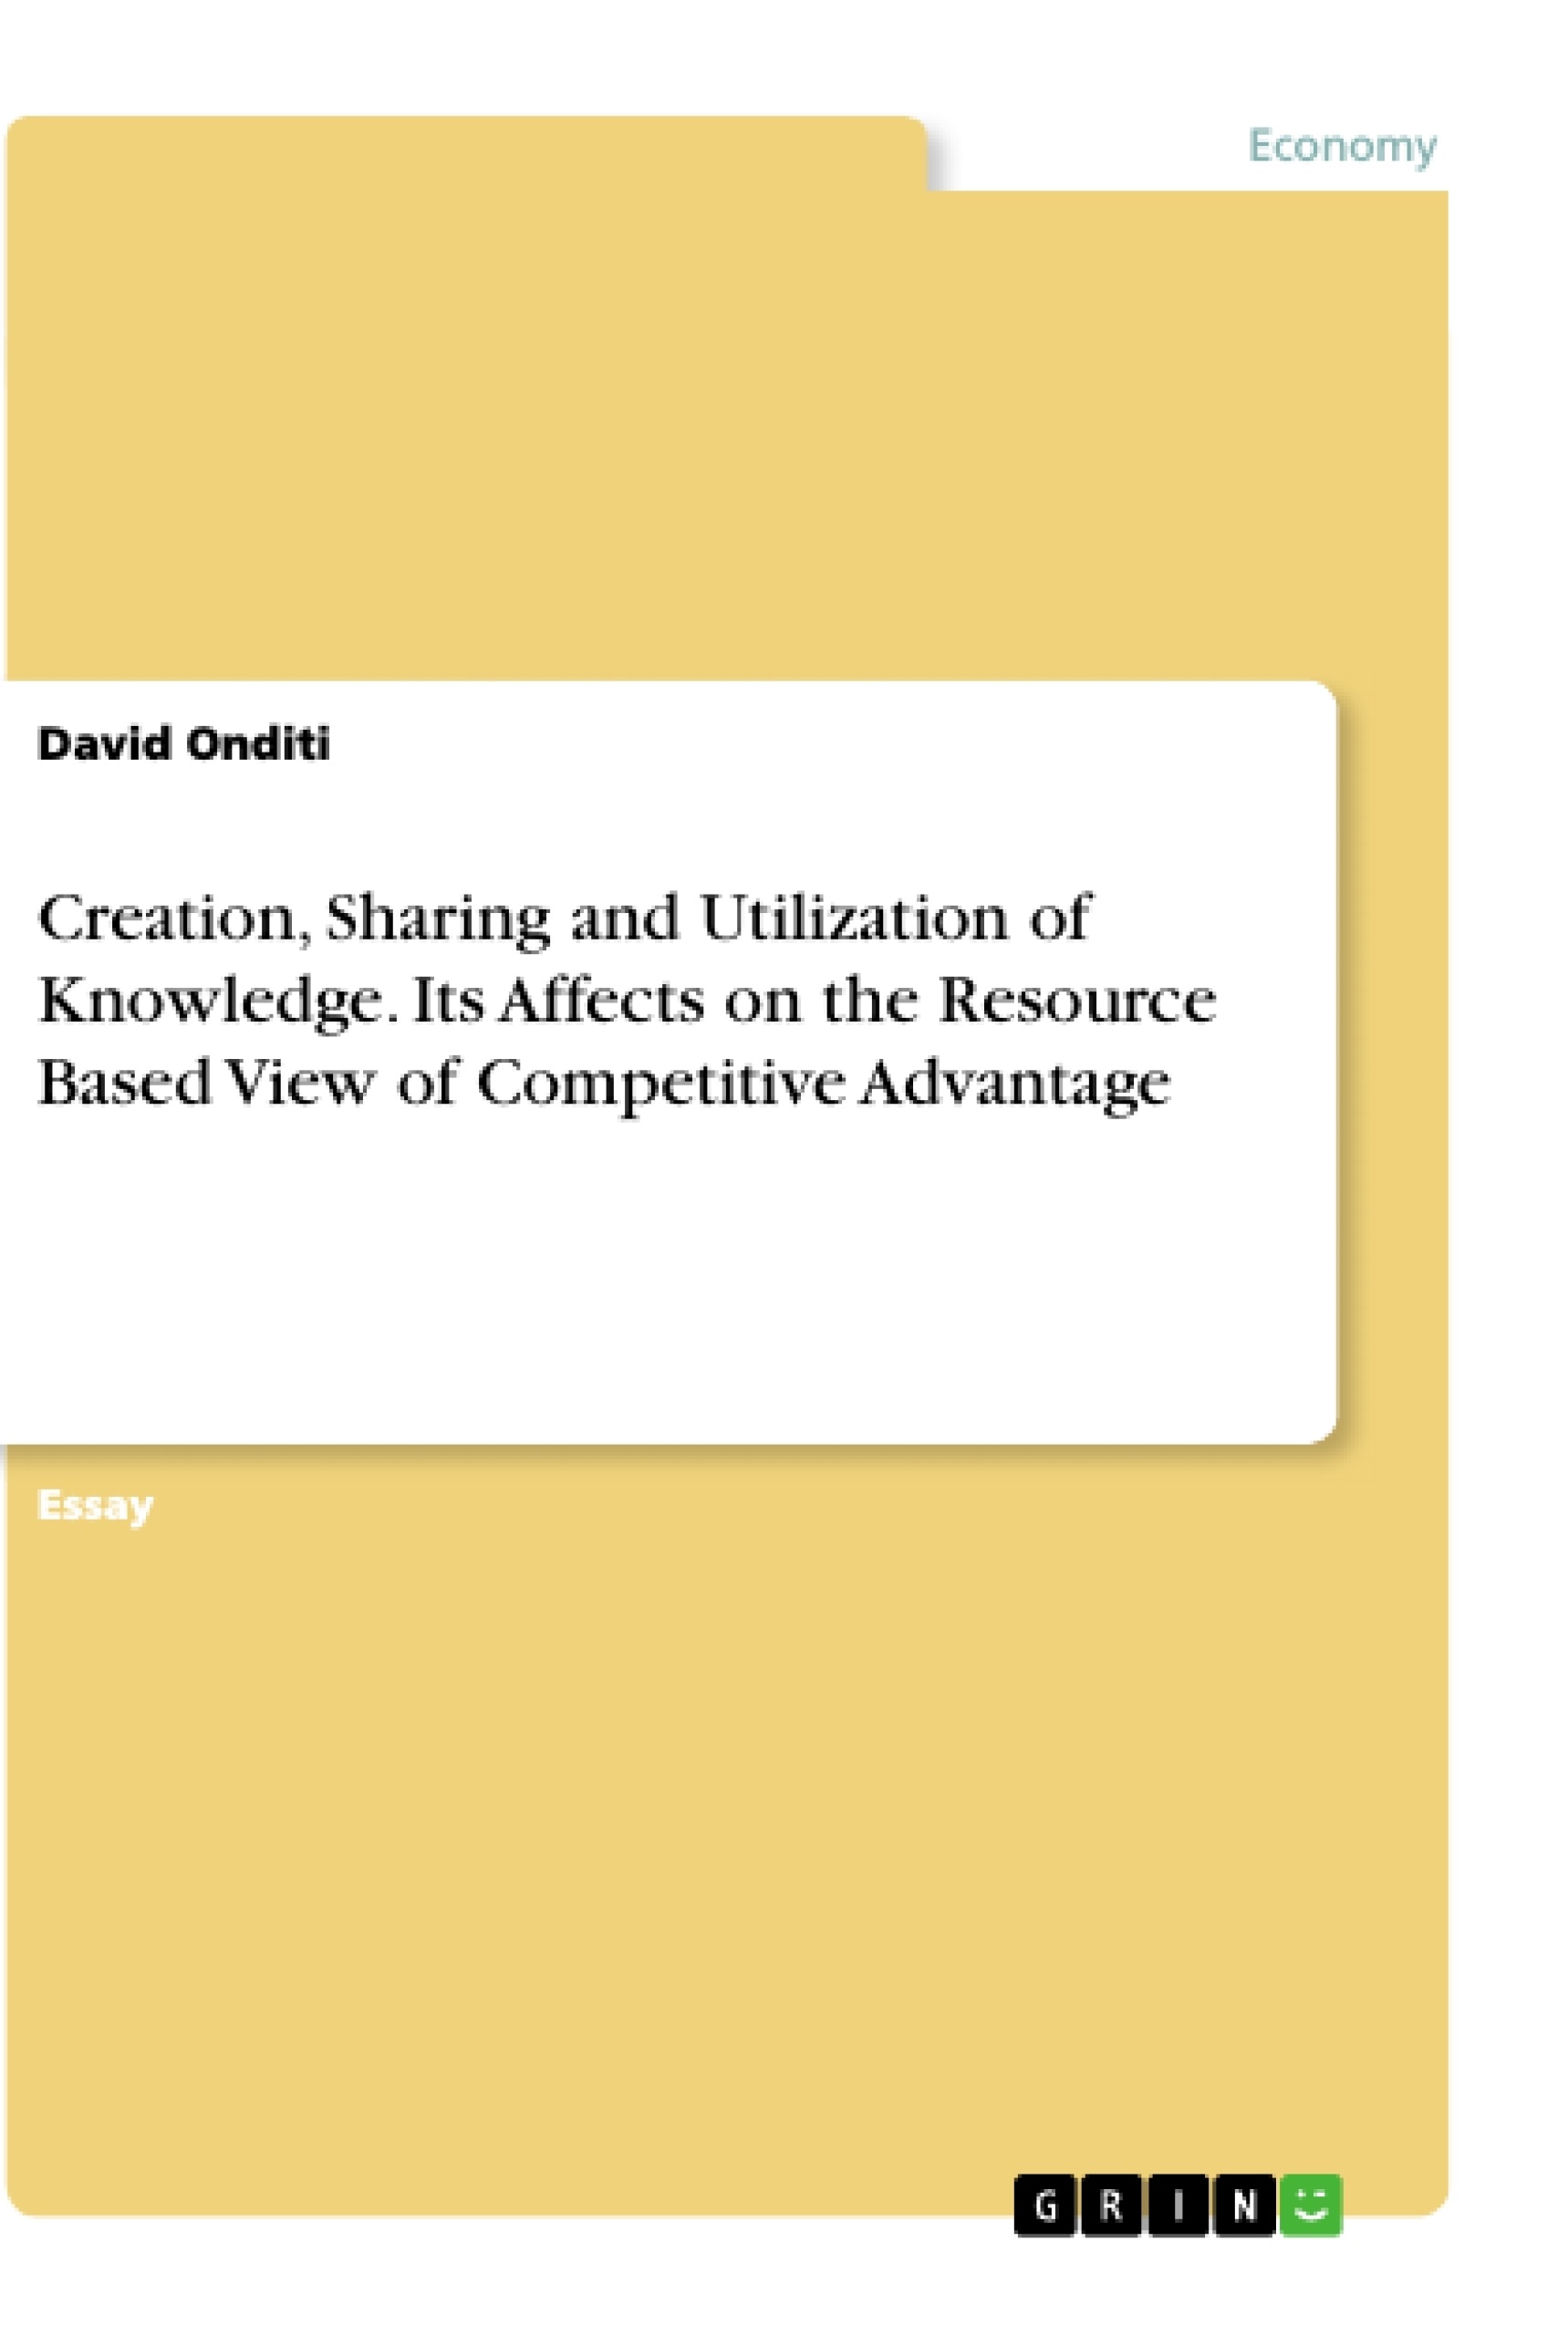 Title: Creation, Sharing and Utilization of Knowledge. Its Affects on the Resource Based View of Competitive Advantage